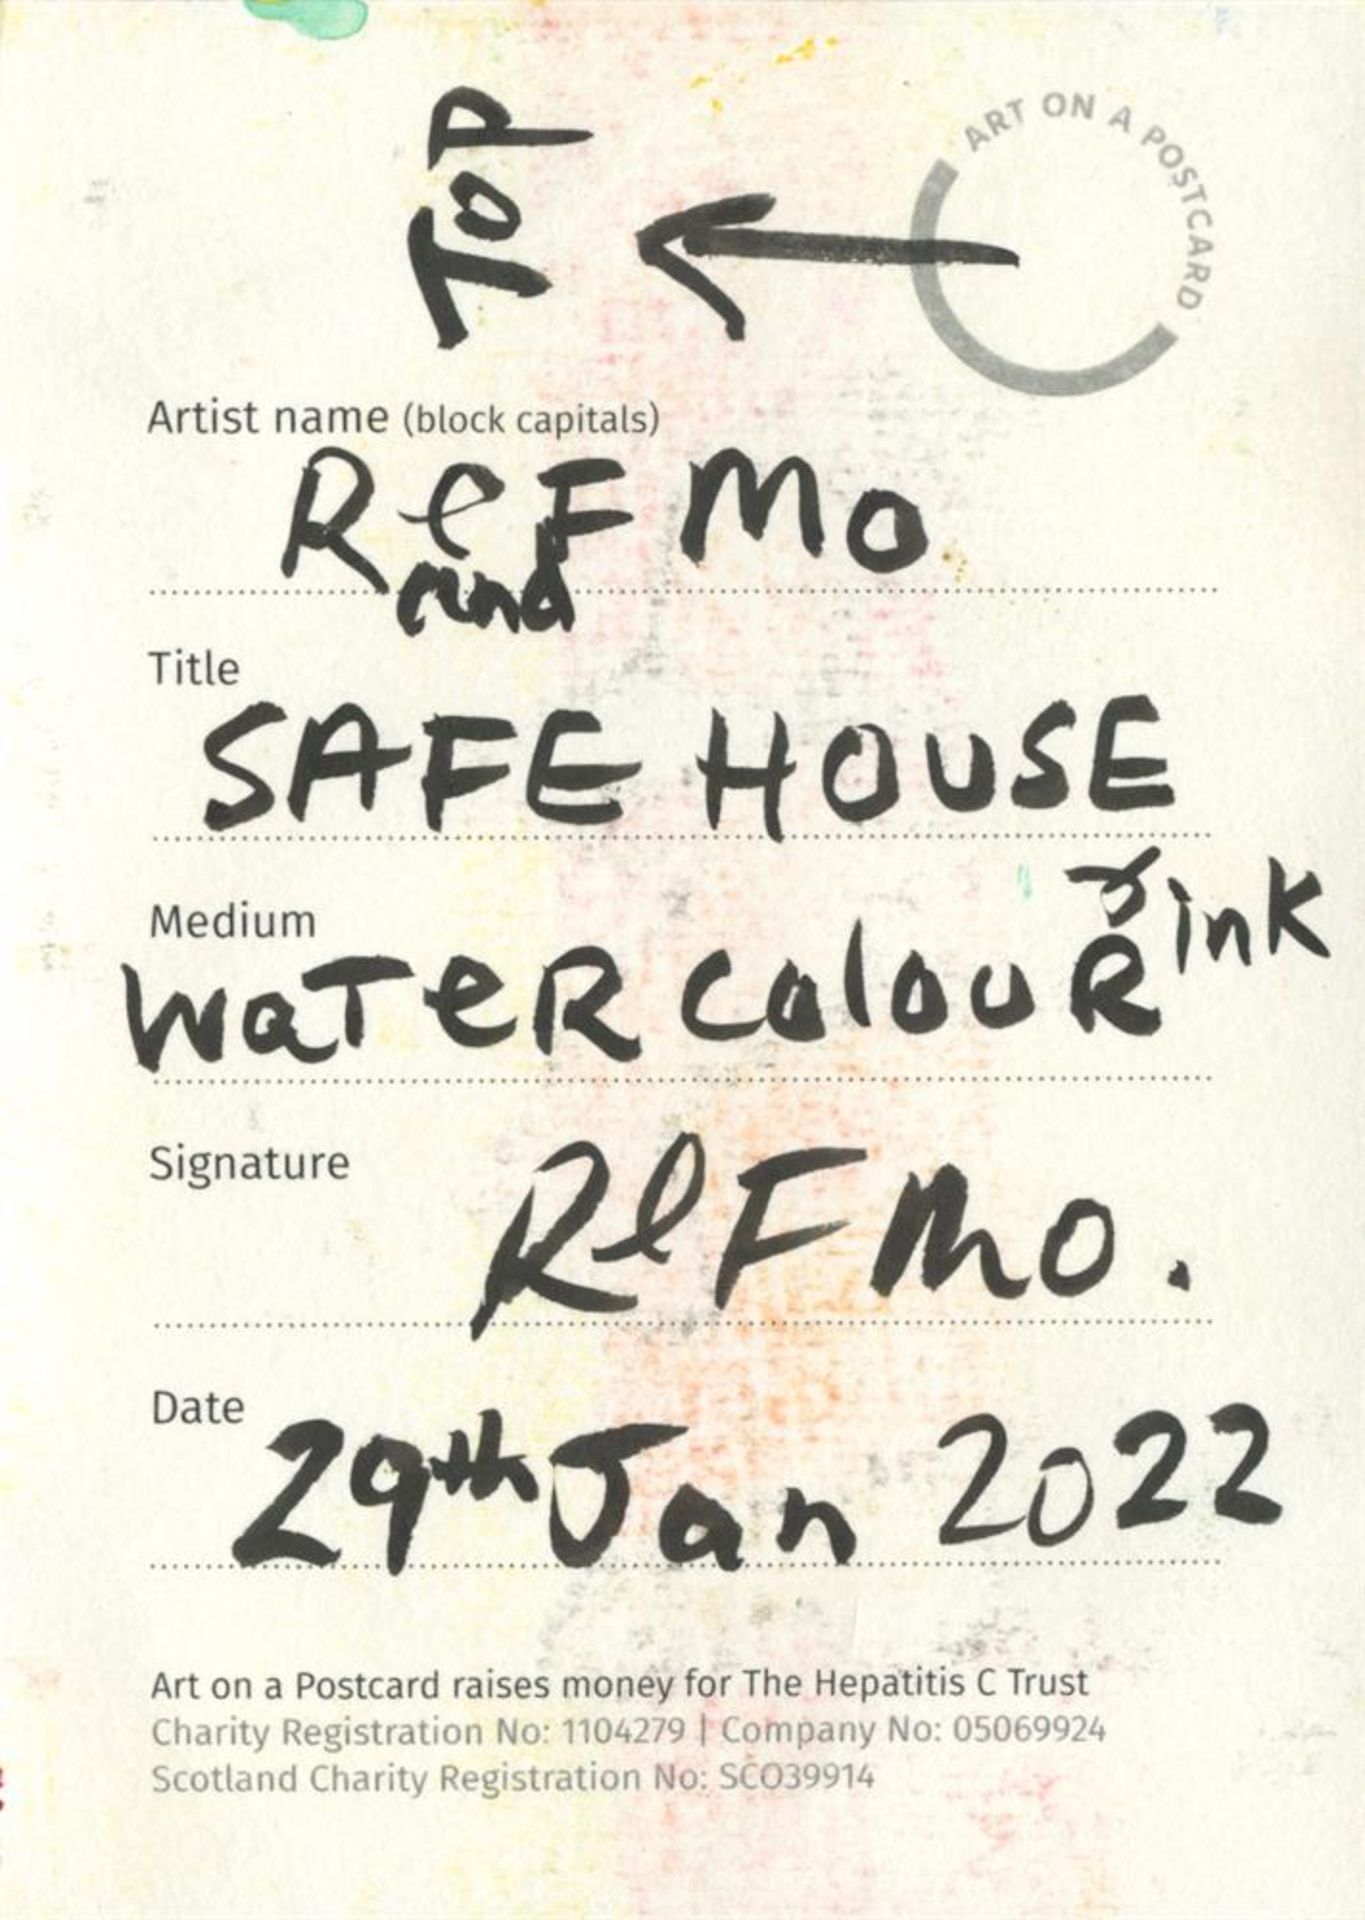 R and F Mo, Safe House, 2022 - Image 2 of 3